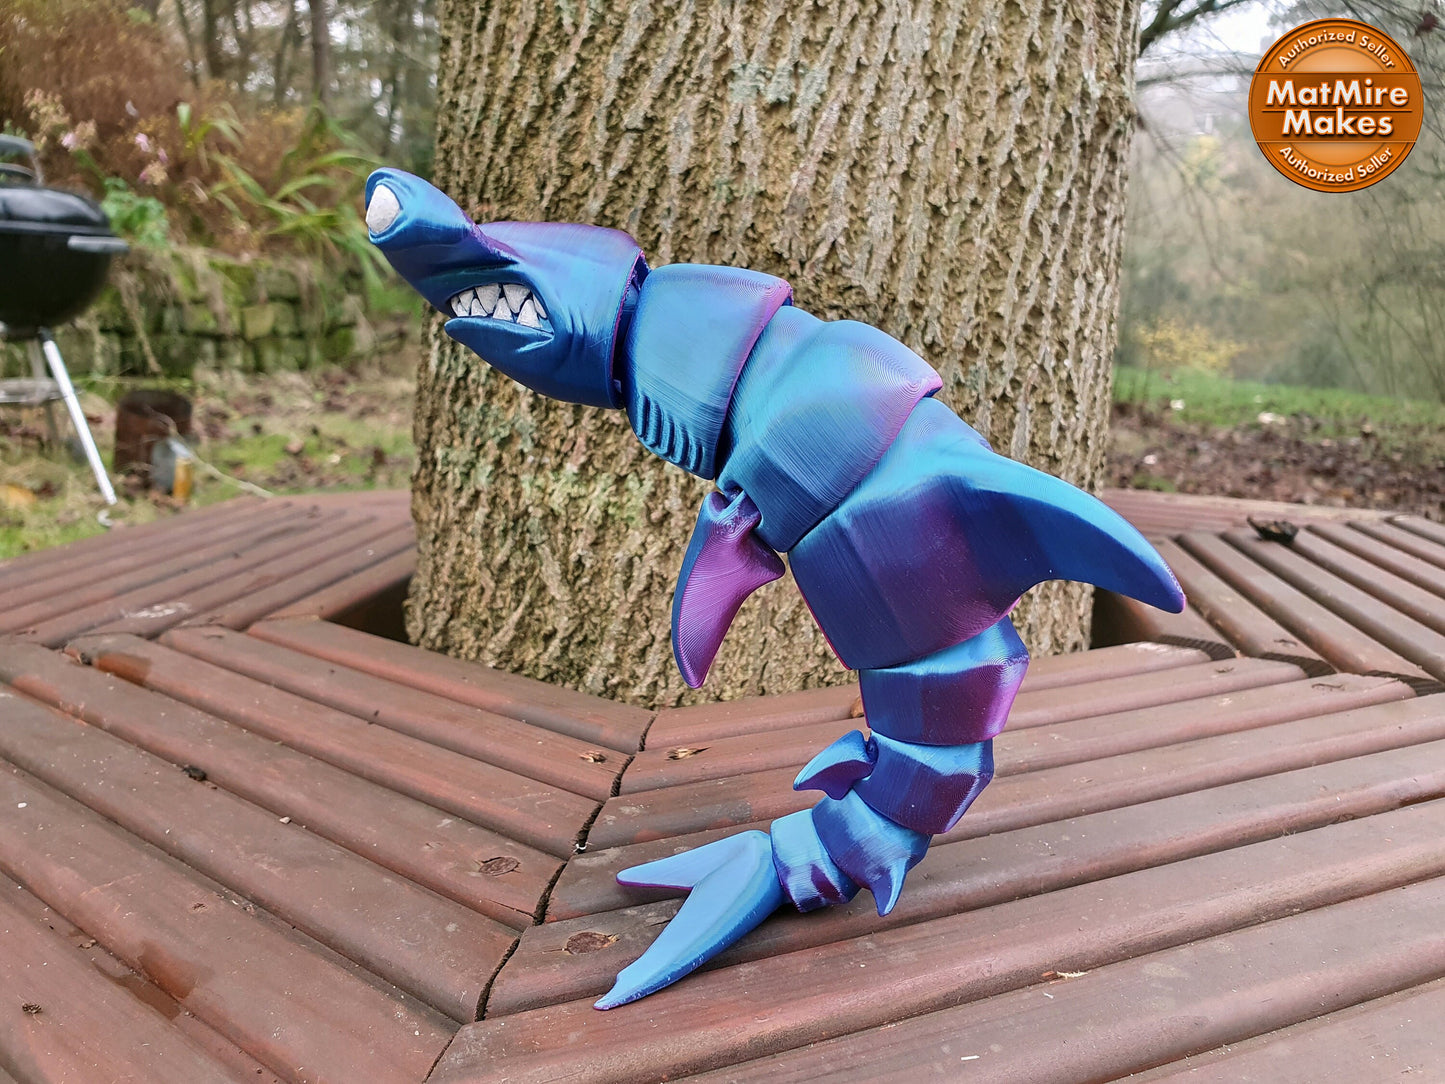 Hammerhead Shark - Articulated Flexible 3D Print. Professionally Hand painted finishing details